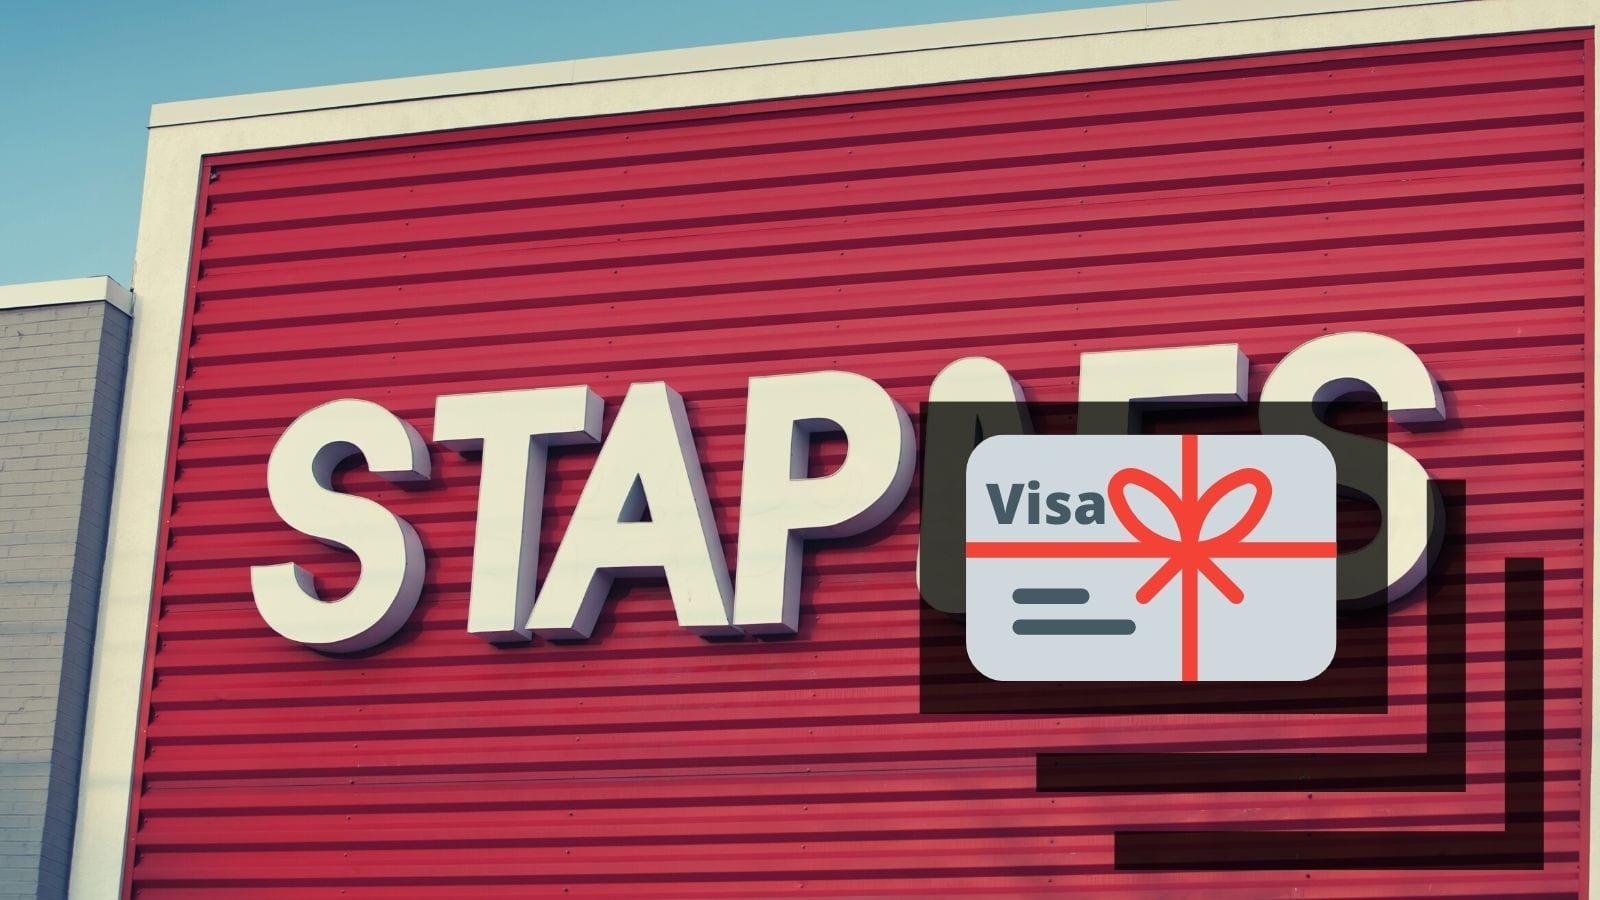 Easy 5x: Fee-free Visa Gift Cards at Staples (Live Now)